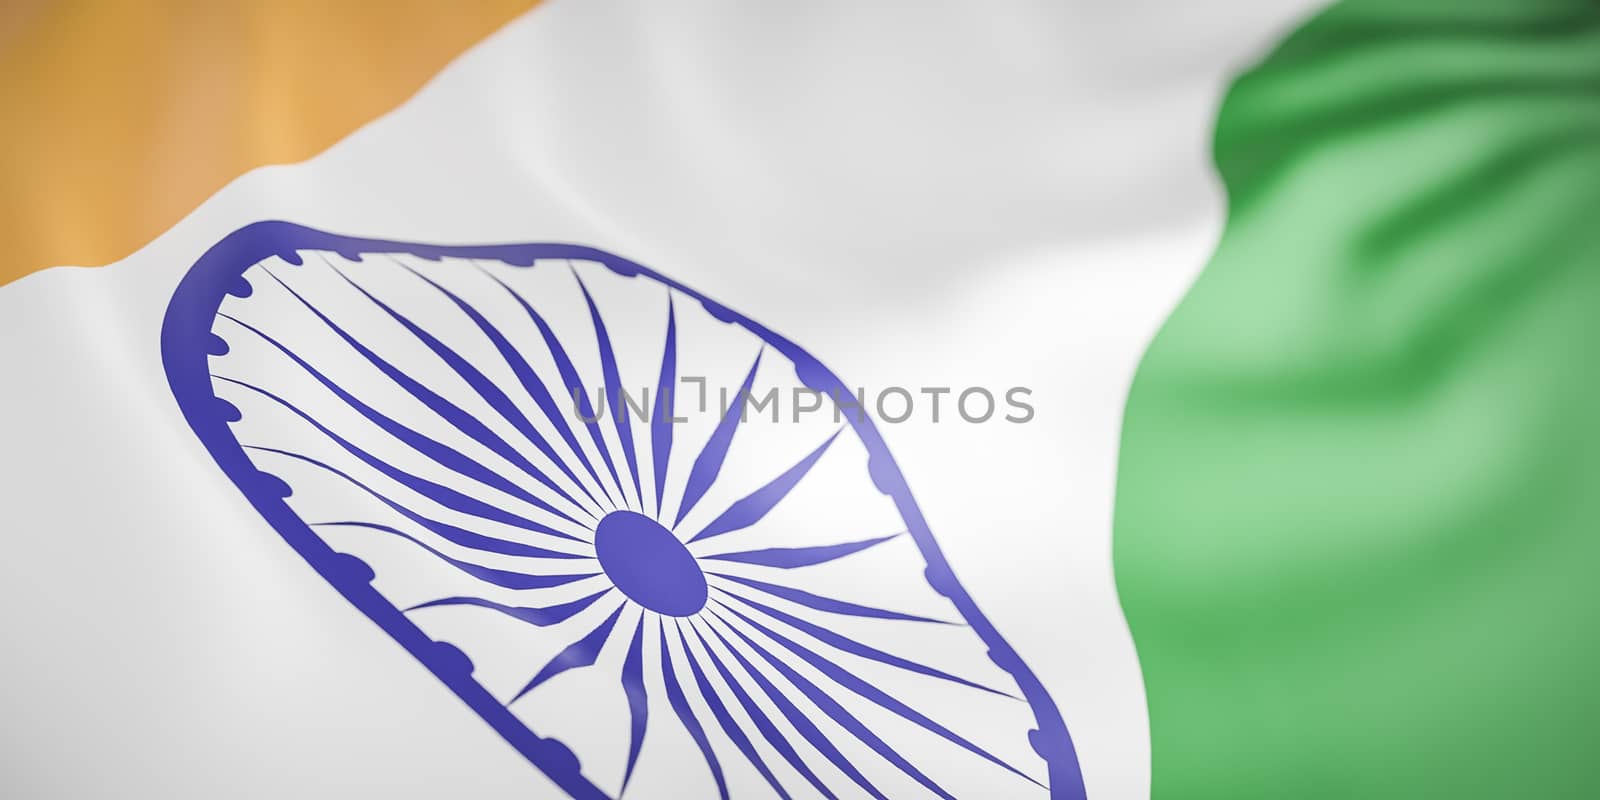 Beautiful India Flag Wave Close Up on banner background with copy space.,3d model and illustration.